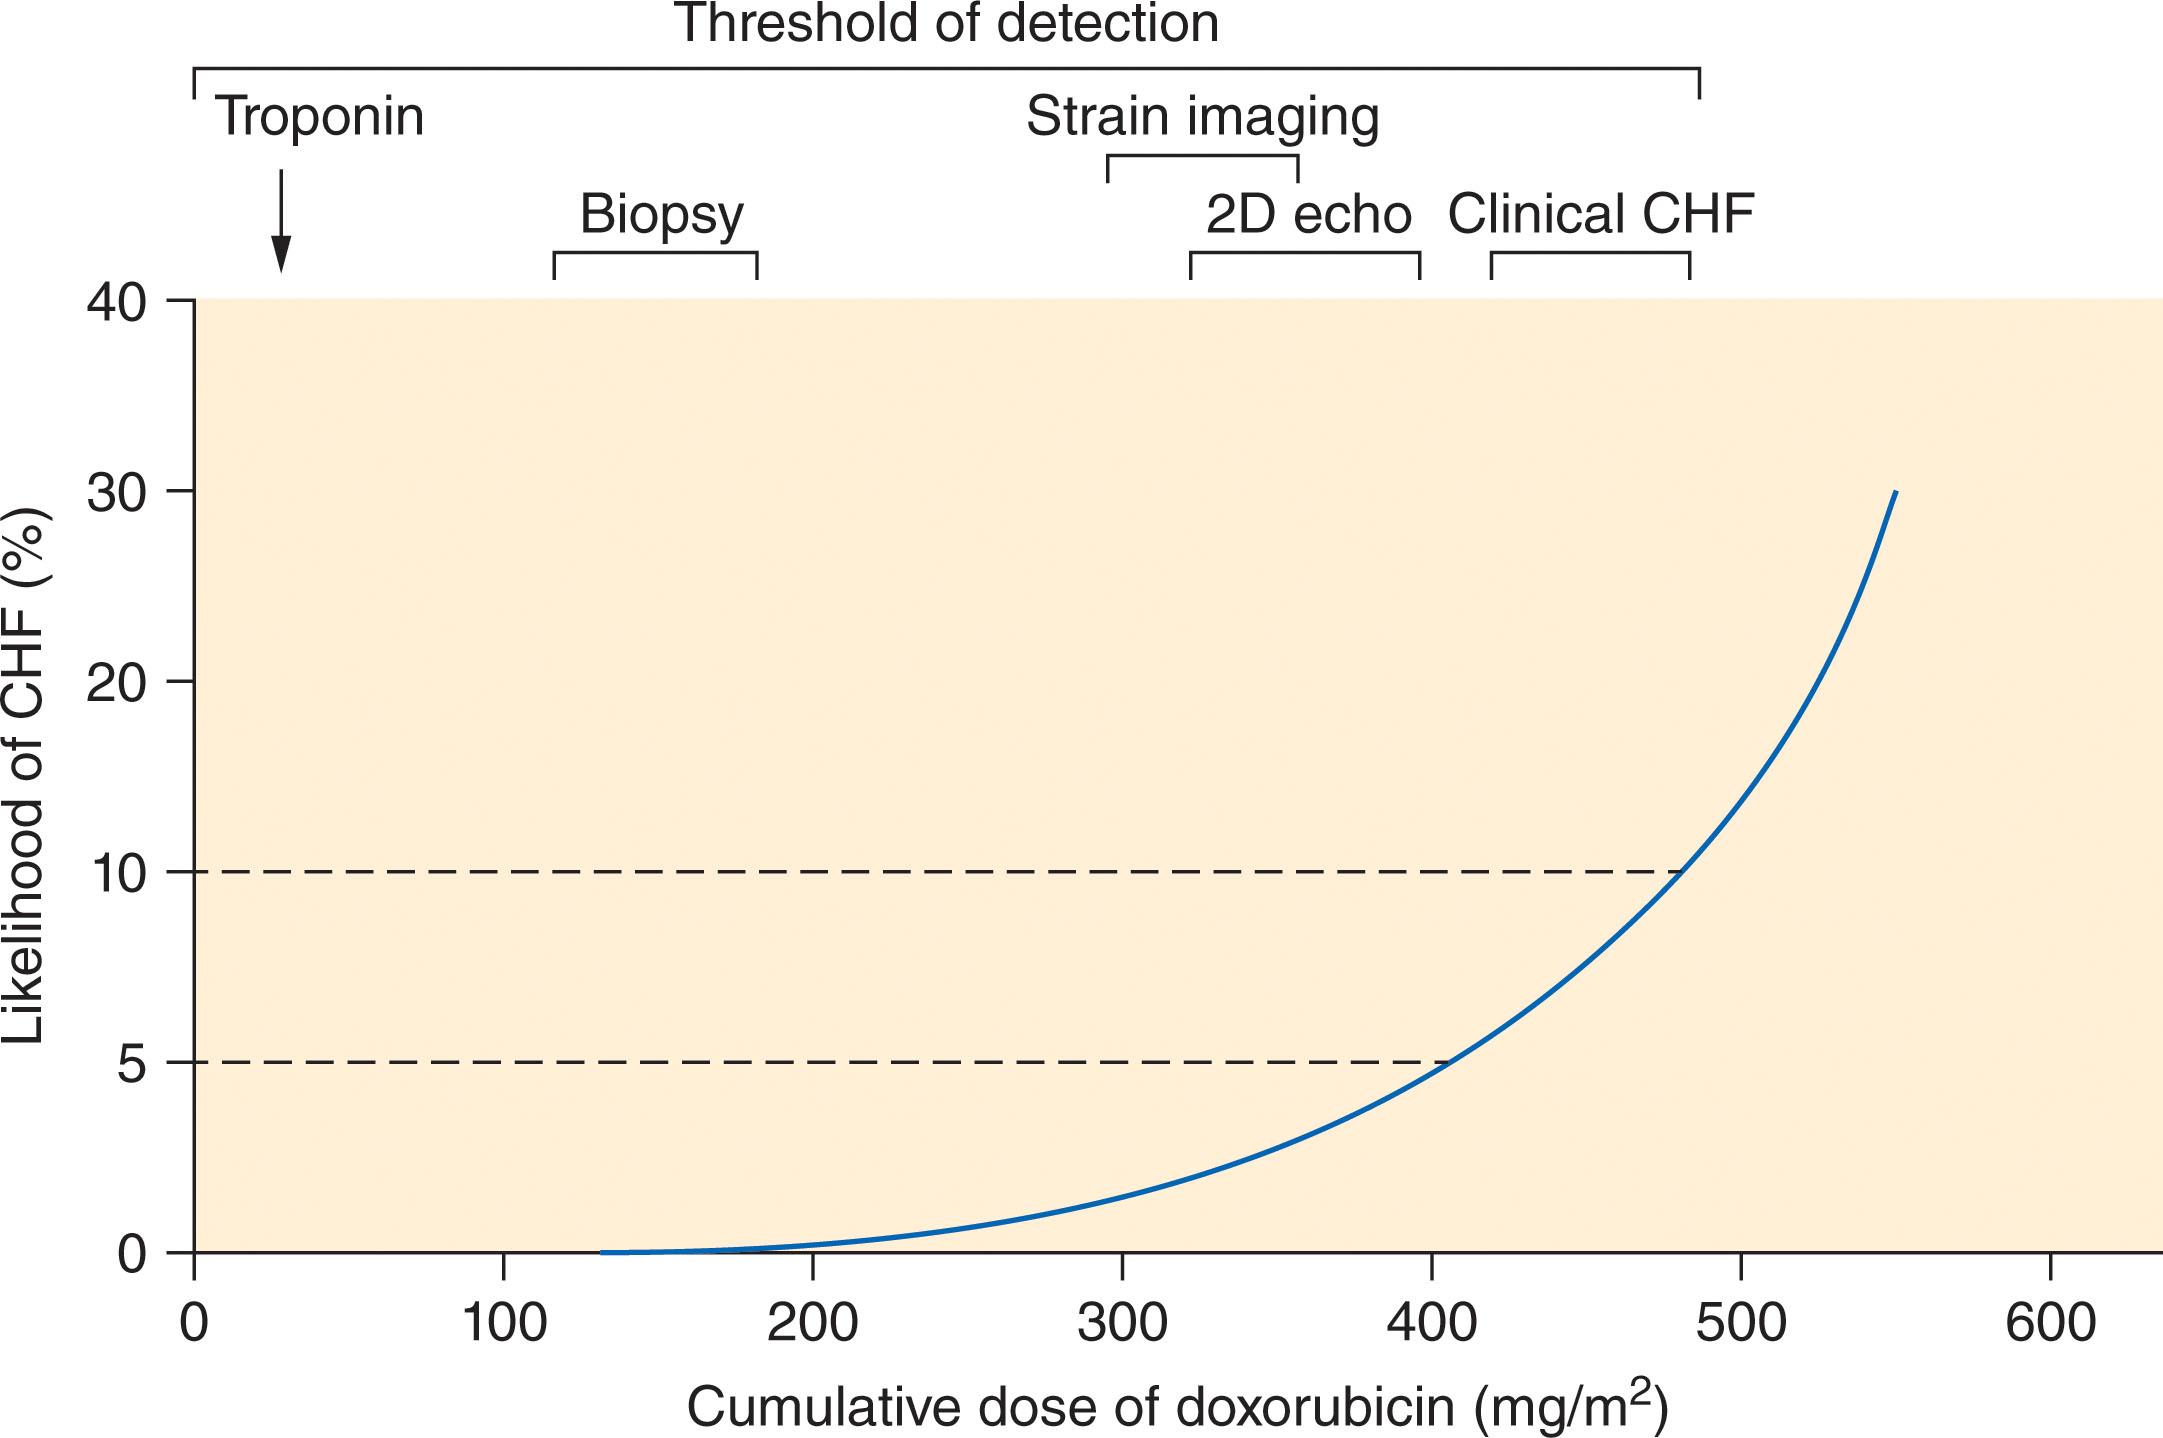 Figure 158.1, THE CORRELATION BETWEEN DOXORUBICIN DOSE AND THE INCIDENCE OF CONGESTIVE HEART DISEASE (CHF).